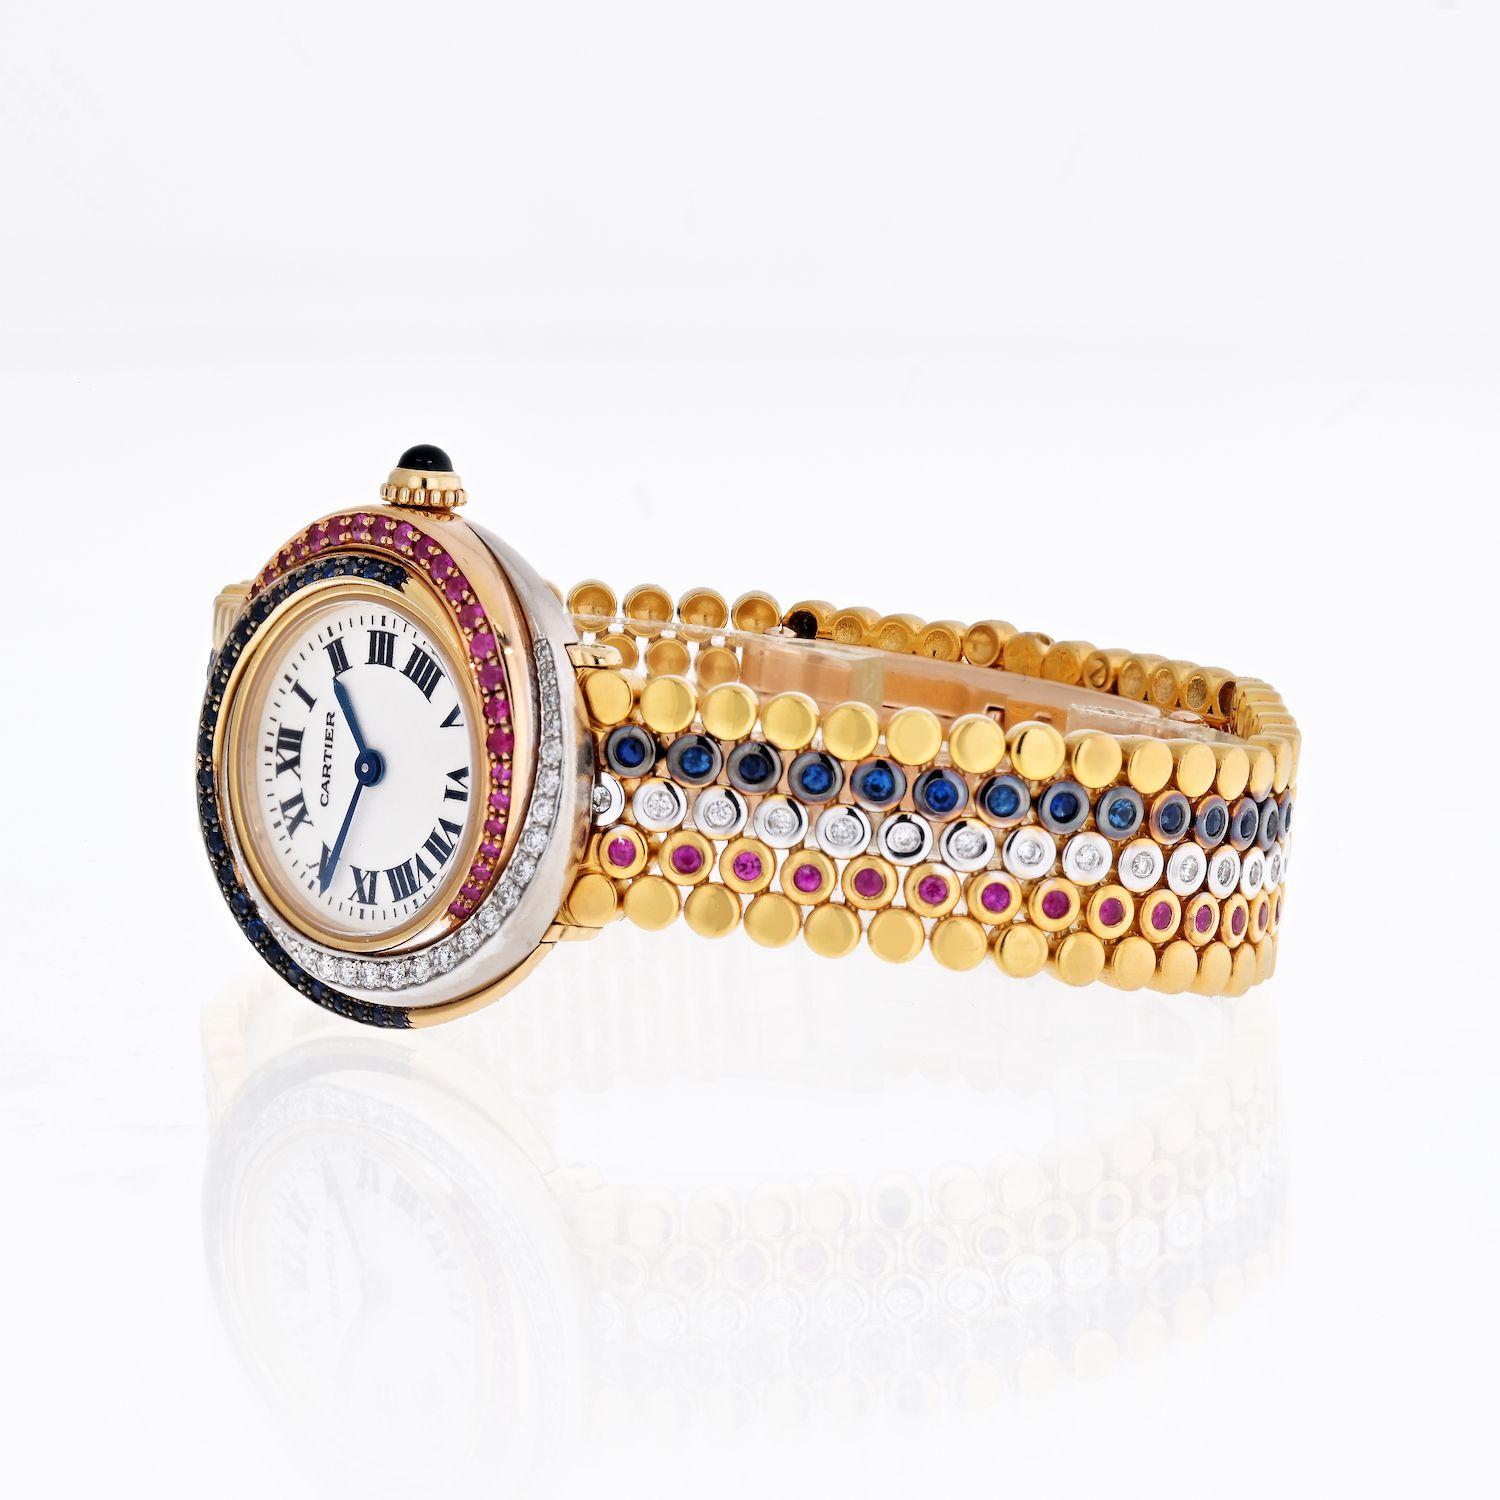 This stunning timepiece from Cartier's Trinity collection features yellow, white, and rose gold bezel spiraling gracefully towards the dial. The bezel is pave set with diamonds, sapphires and rubies. Furthermore the bracelet is bezel set with